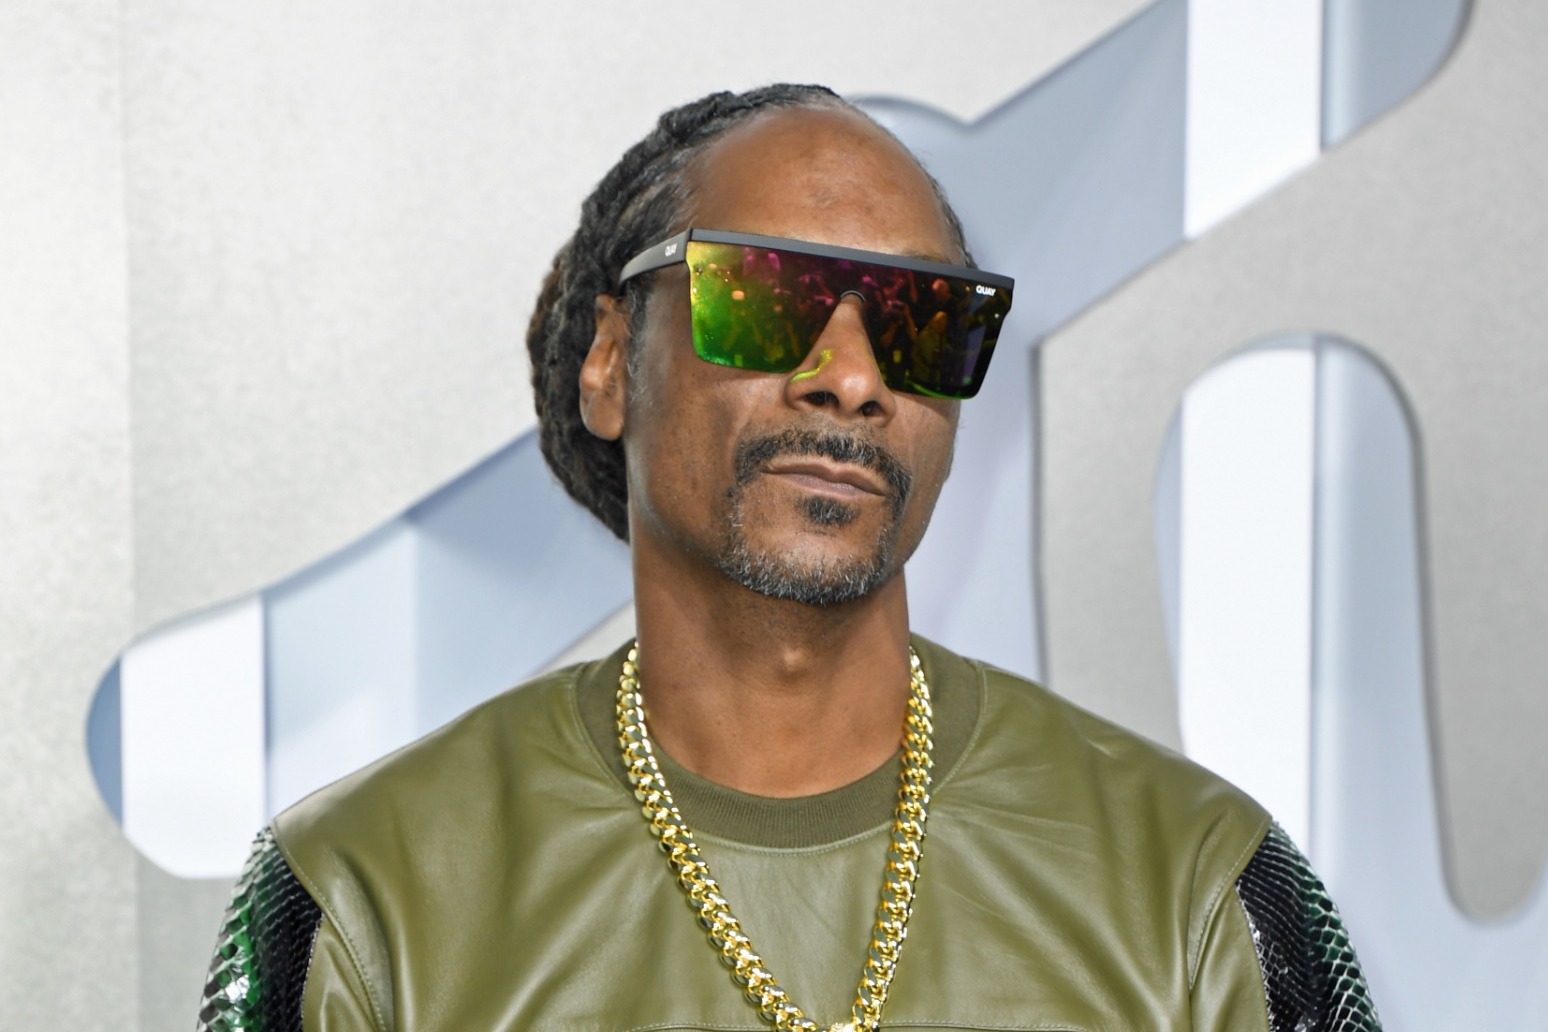 Nearly one million vote for Snoop Dogg to run Twitter after he mimics Musk poll 